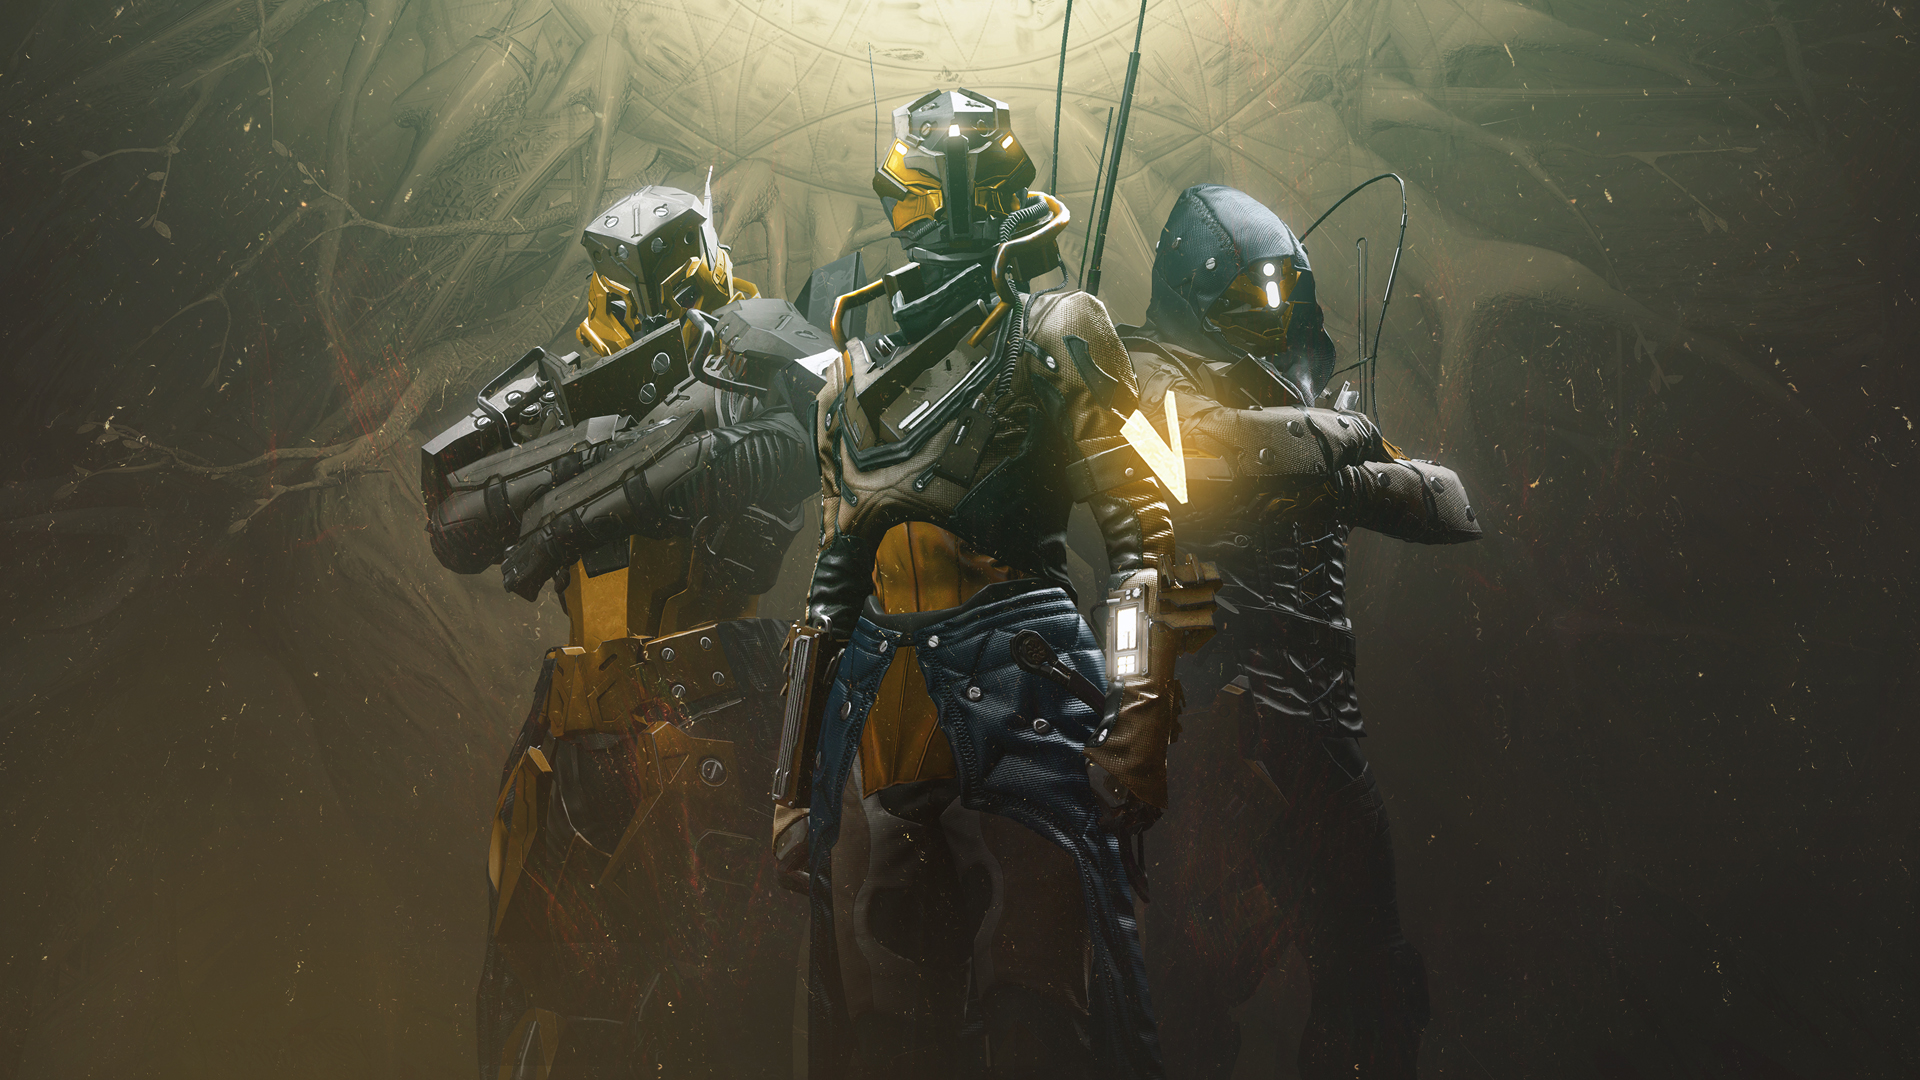 Video Game Destiny 2 HD Wallpaper | Background Image